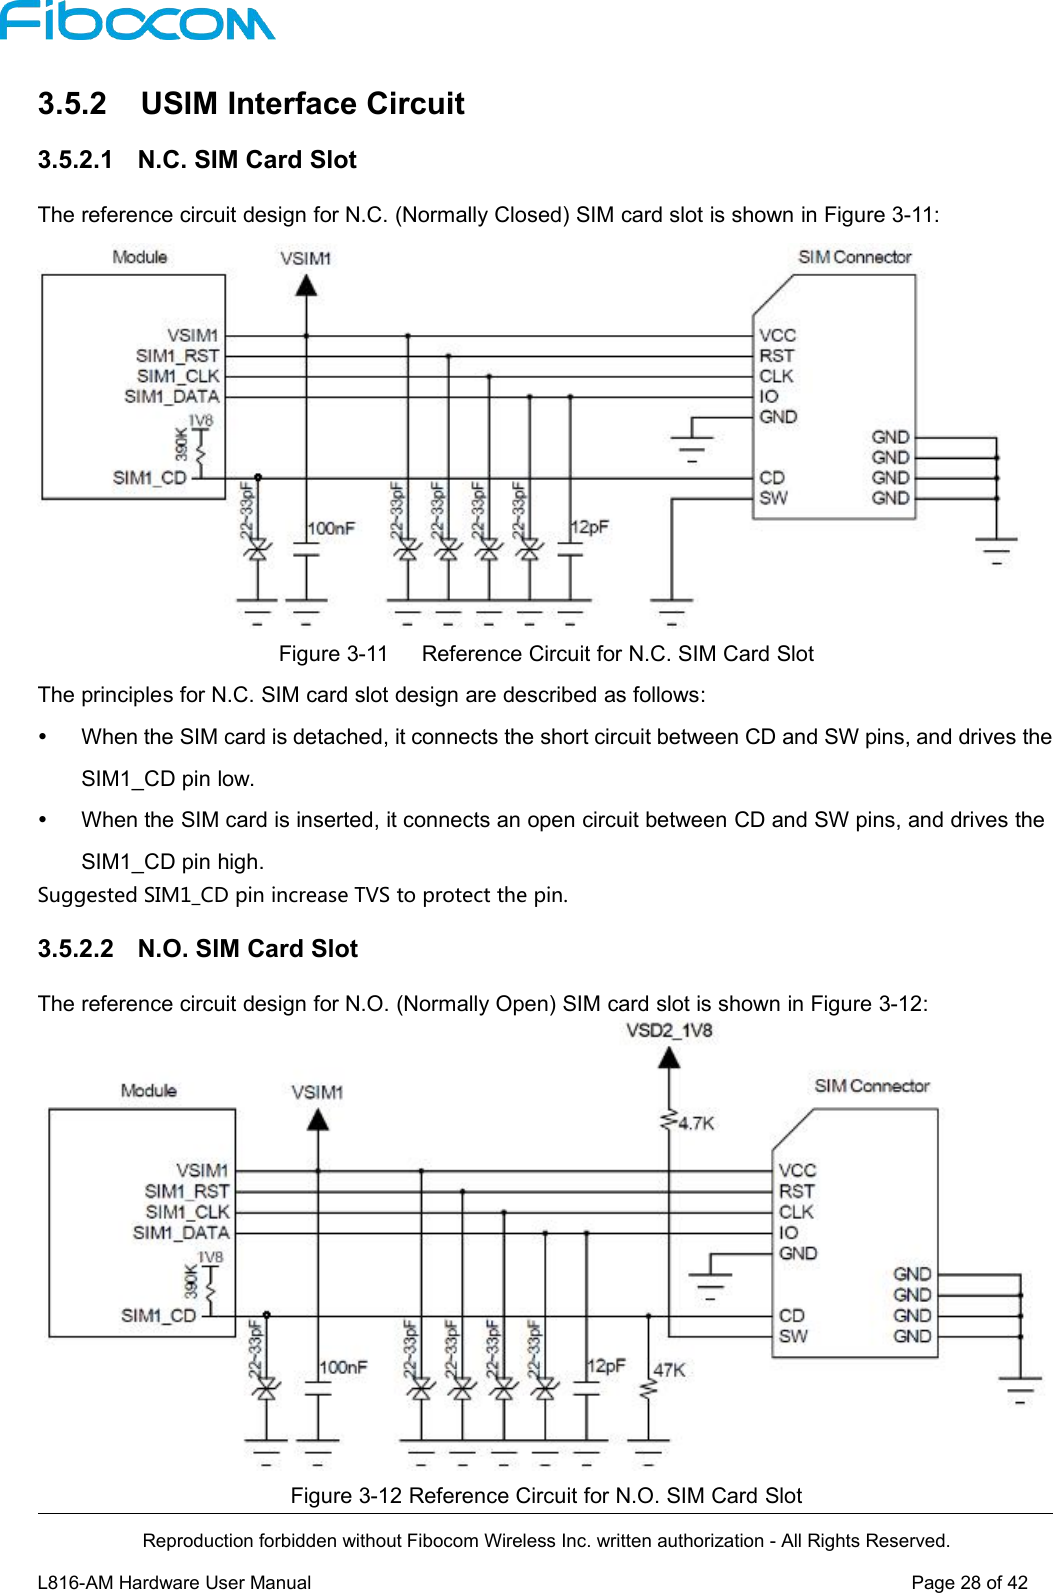 Reproduction forbidden without Fibocom Wireless Inc. written authorization - All Rights Reserved.L816-AM Hardware User Manual Page28of423.5.2 USIM Interface Circuit3.5.2.1 N.C. SIM Card SlotThe reference circuit design for N.C. (Normally Closed) SIM card slot is shown in Figure 3-11:Figure 3-11 Reference Circuit for N.C. SIM Card SlotThe principles for N.C. SIM card slot design are described as follows:When the SIM card is detached, it connects the short circuit between CD and SW pins, and drives theSIM1_CD pin low.When the SIM card is inserted, it connects an open circuit between CD and SW pins, and drives theSIM1_CD pin high.Suggested SIM1_CD pin increase TVS to protect the pin.3.5.2.2 N.O. SIM Card SlotThe reference circuit design for N.O. (Normally Open) SIM card slot is shown in Figure 3-12:Figure 3-12 Reference Circuit for N.O. SIM Card Slot